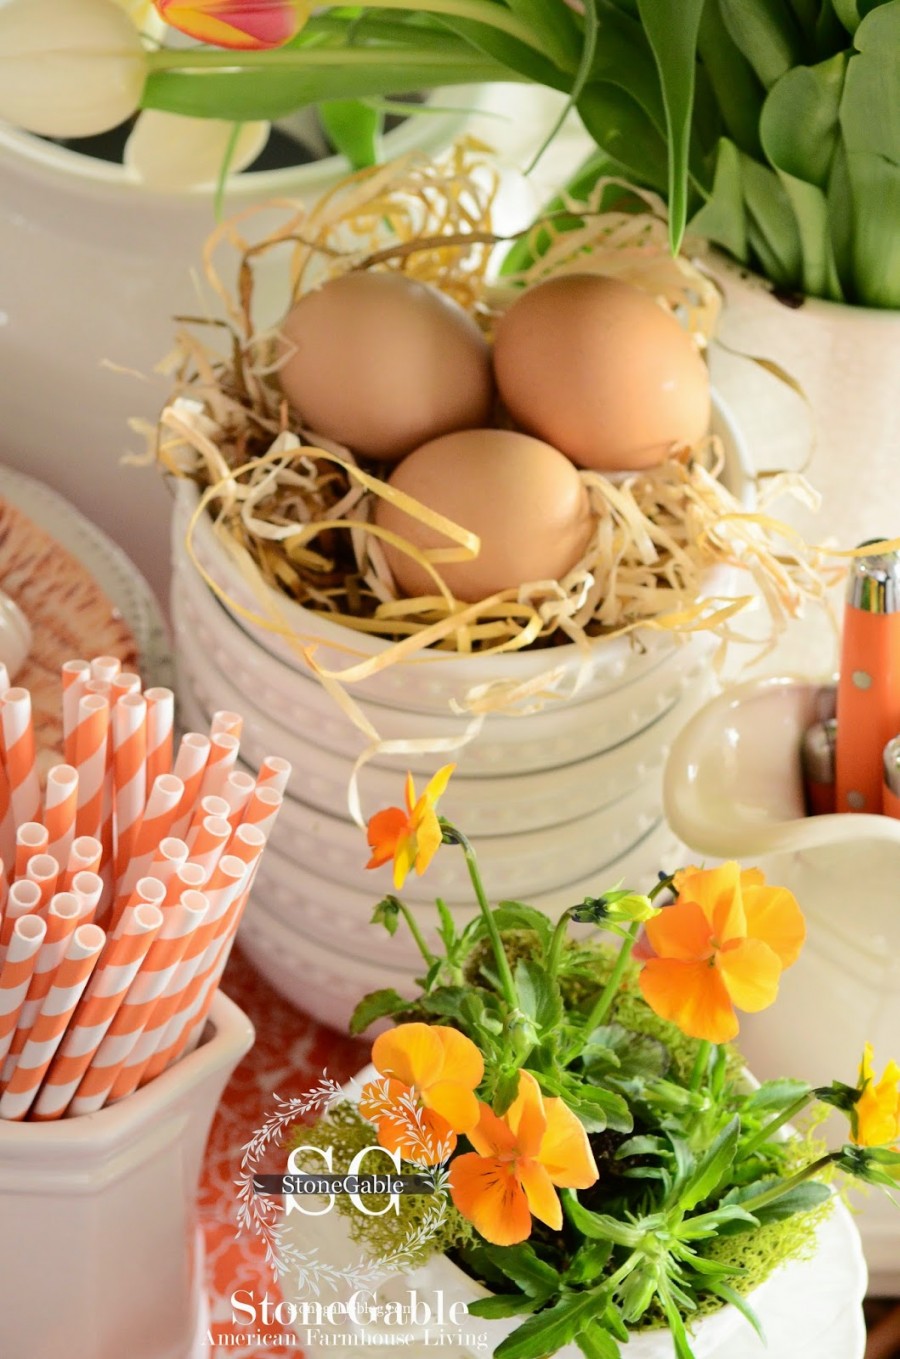 AN EASTER DINNER TIMELINE. Here's an easy way to plan ahead and enjoy a fabulous Easter dinner with those you love!